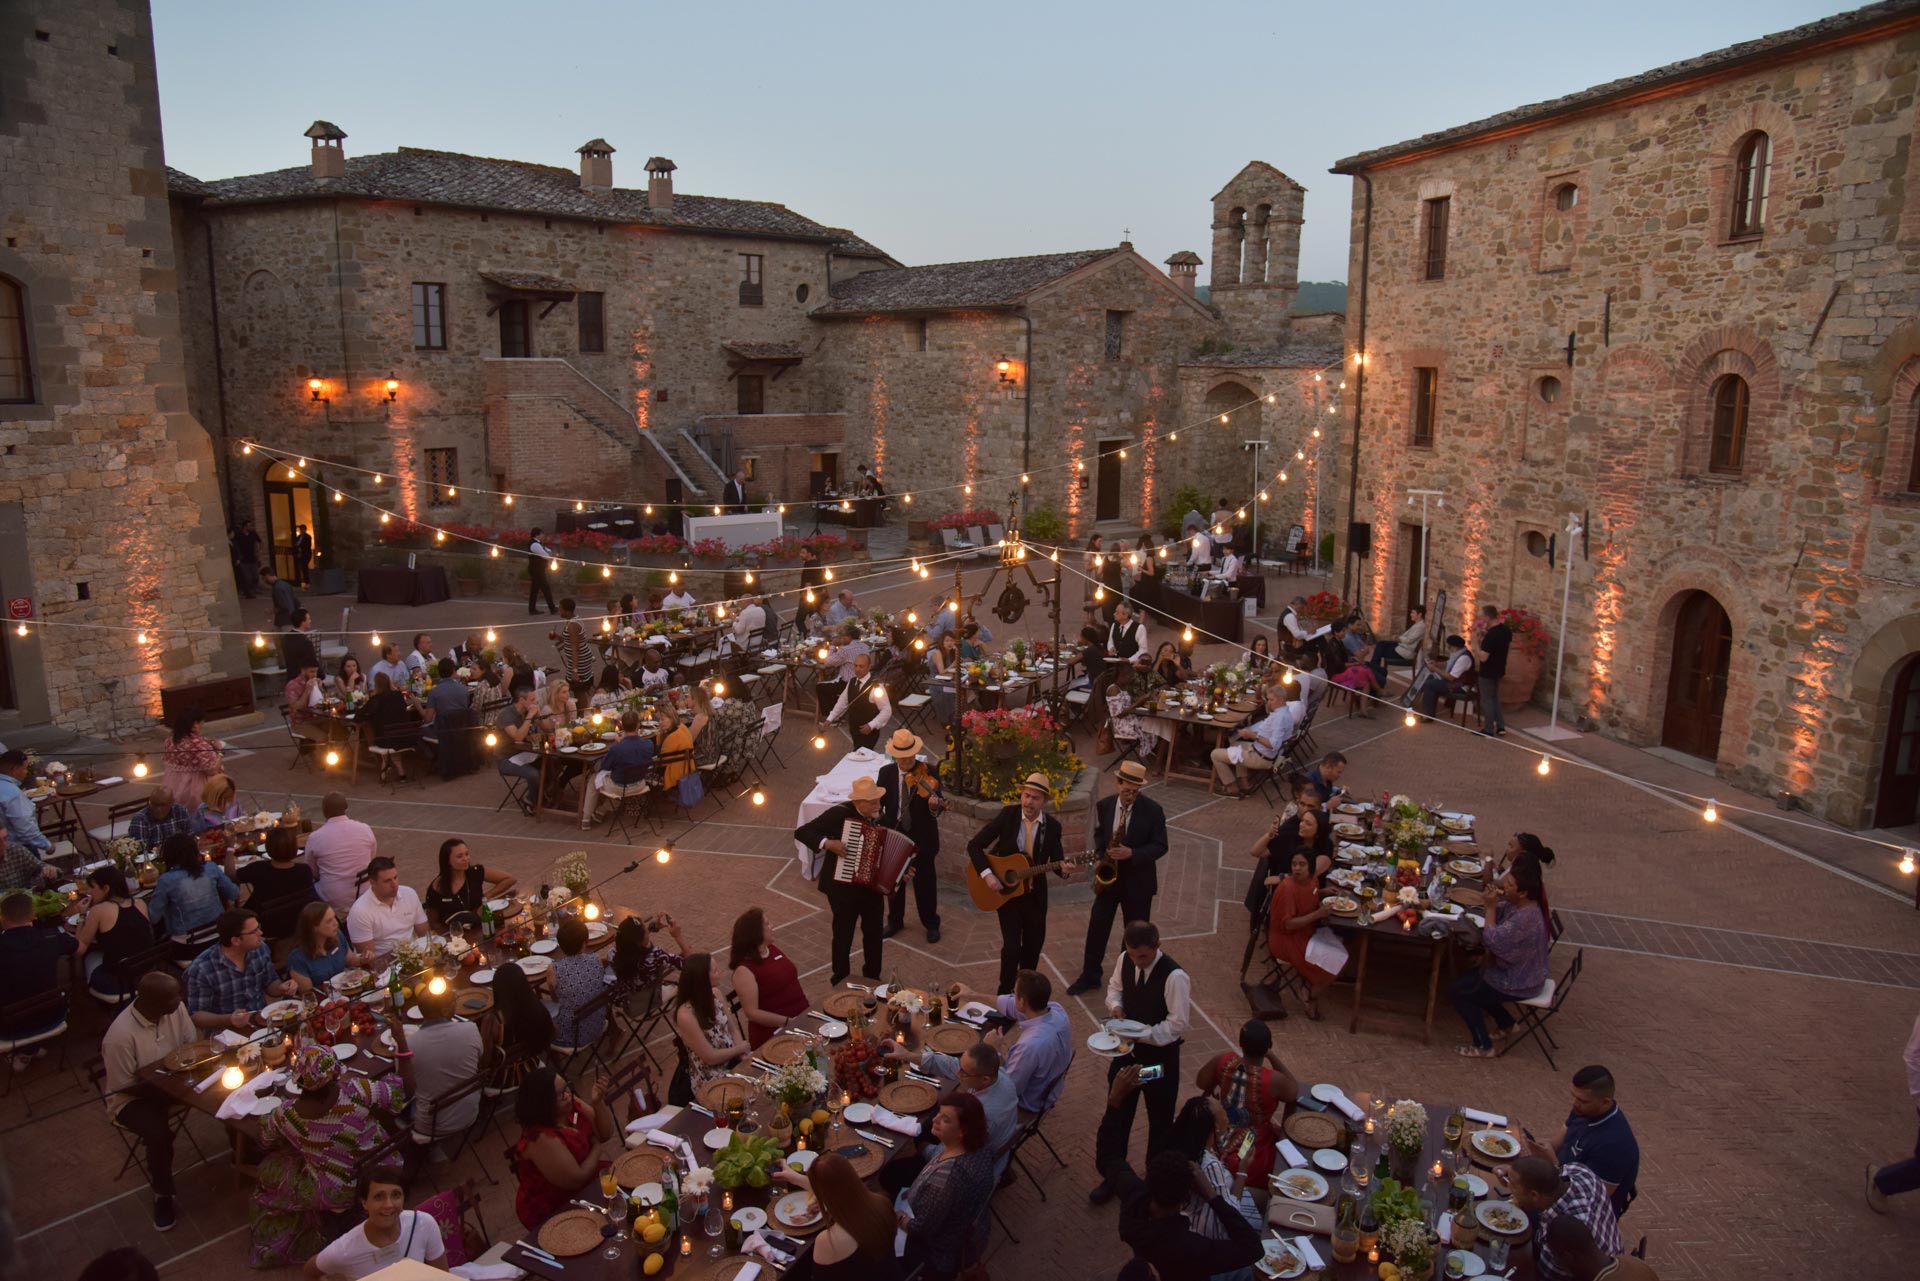 Outdoor dinner in a Tuscan hamlet